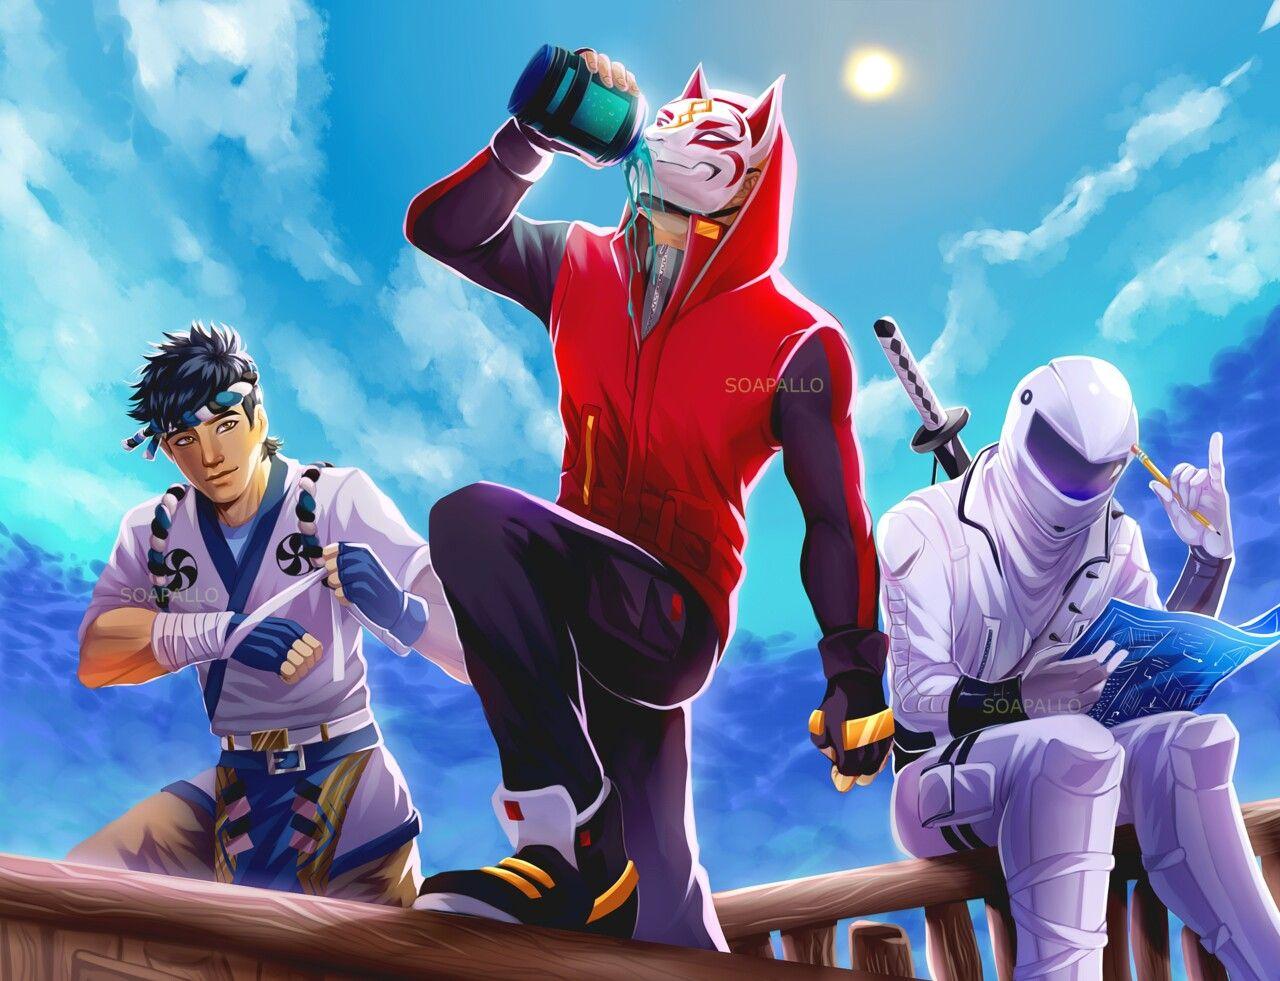 All Anime Fortnite Skins Ranked from Worst to Best | FPS Champion